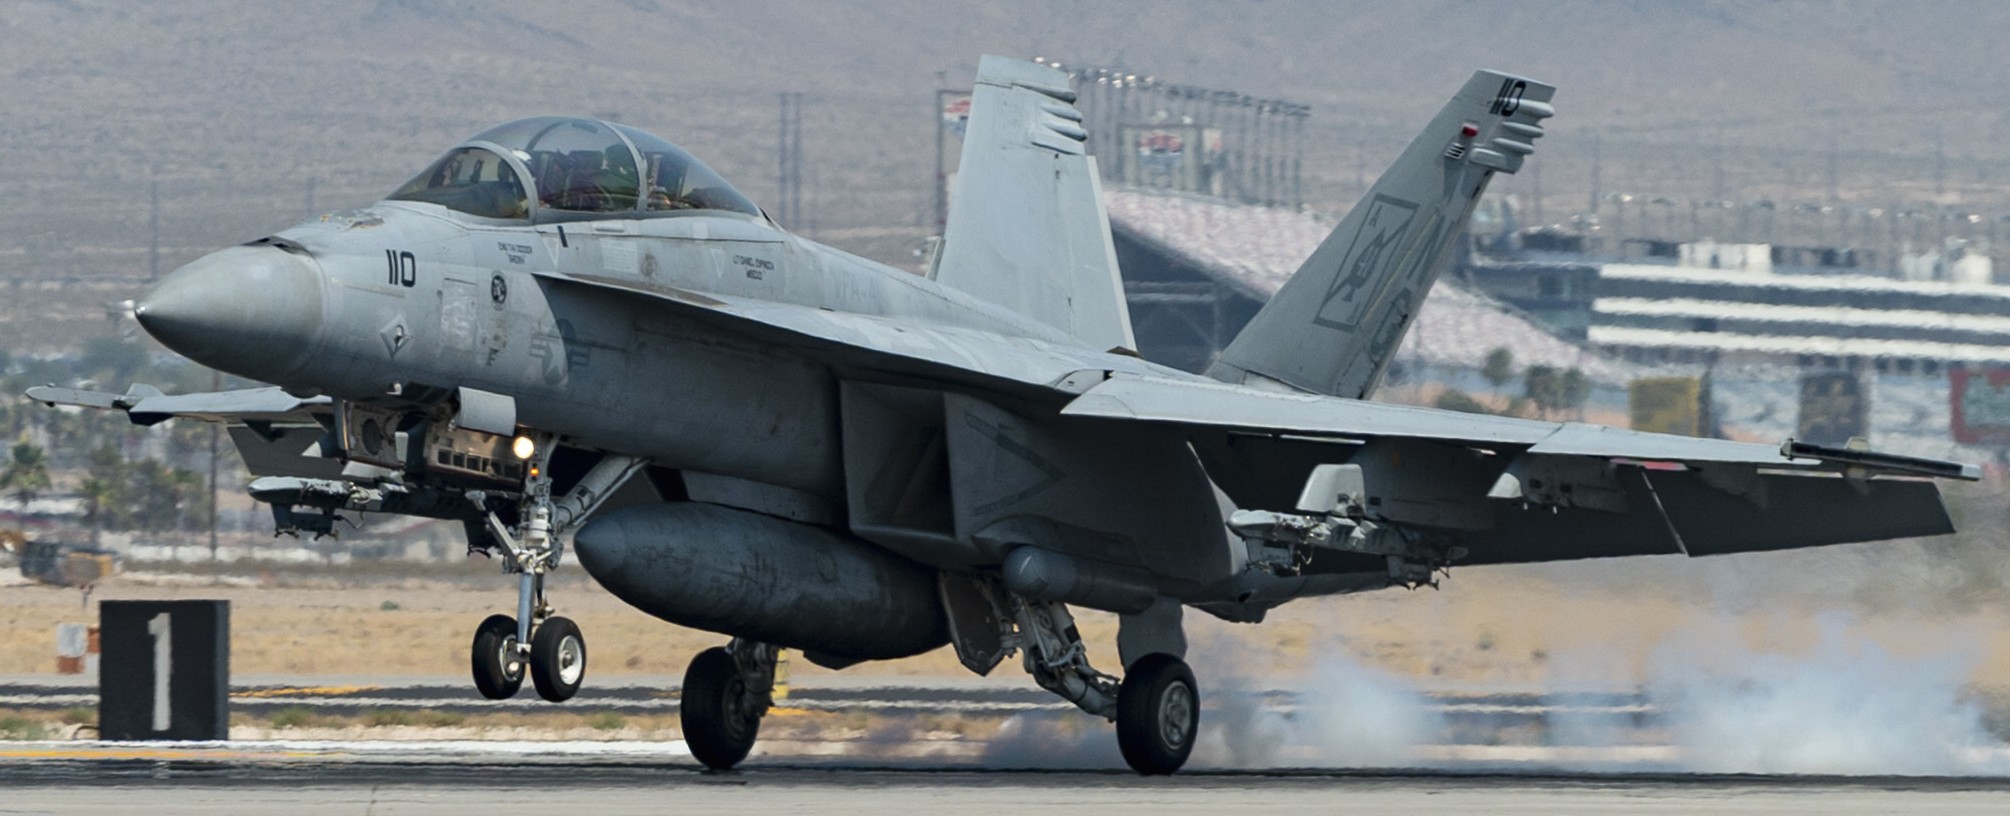 vfa-41 black aces strike fighter squadron f/a-18f super hornet cvw-9 exercise green flag 20-9 nellis afb nevada 62